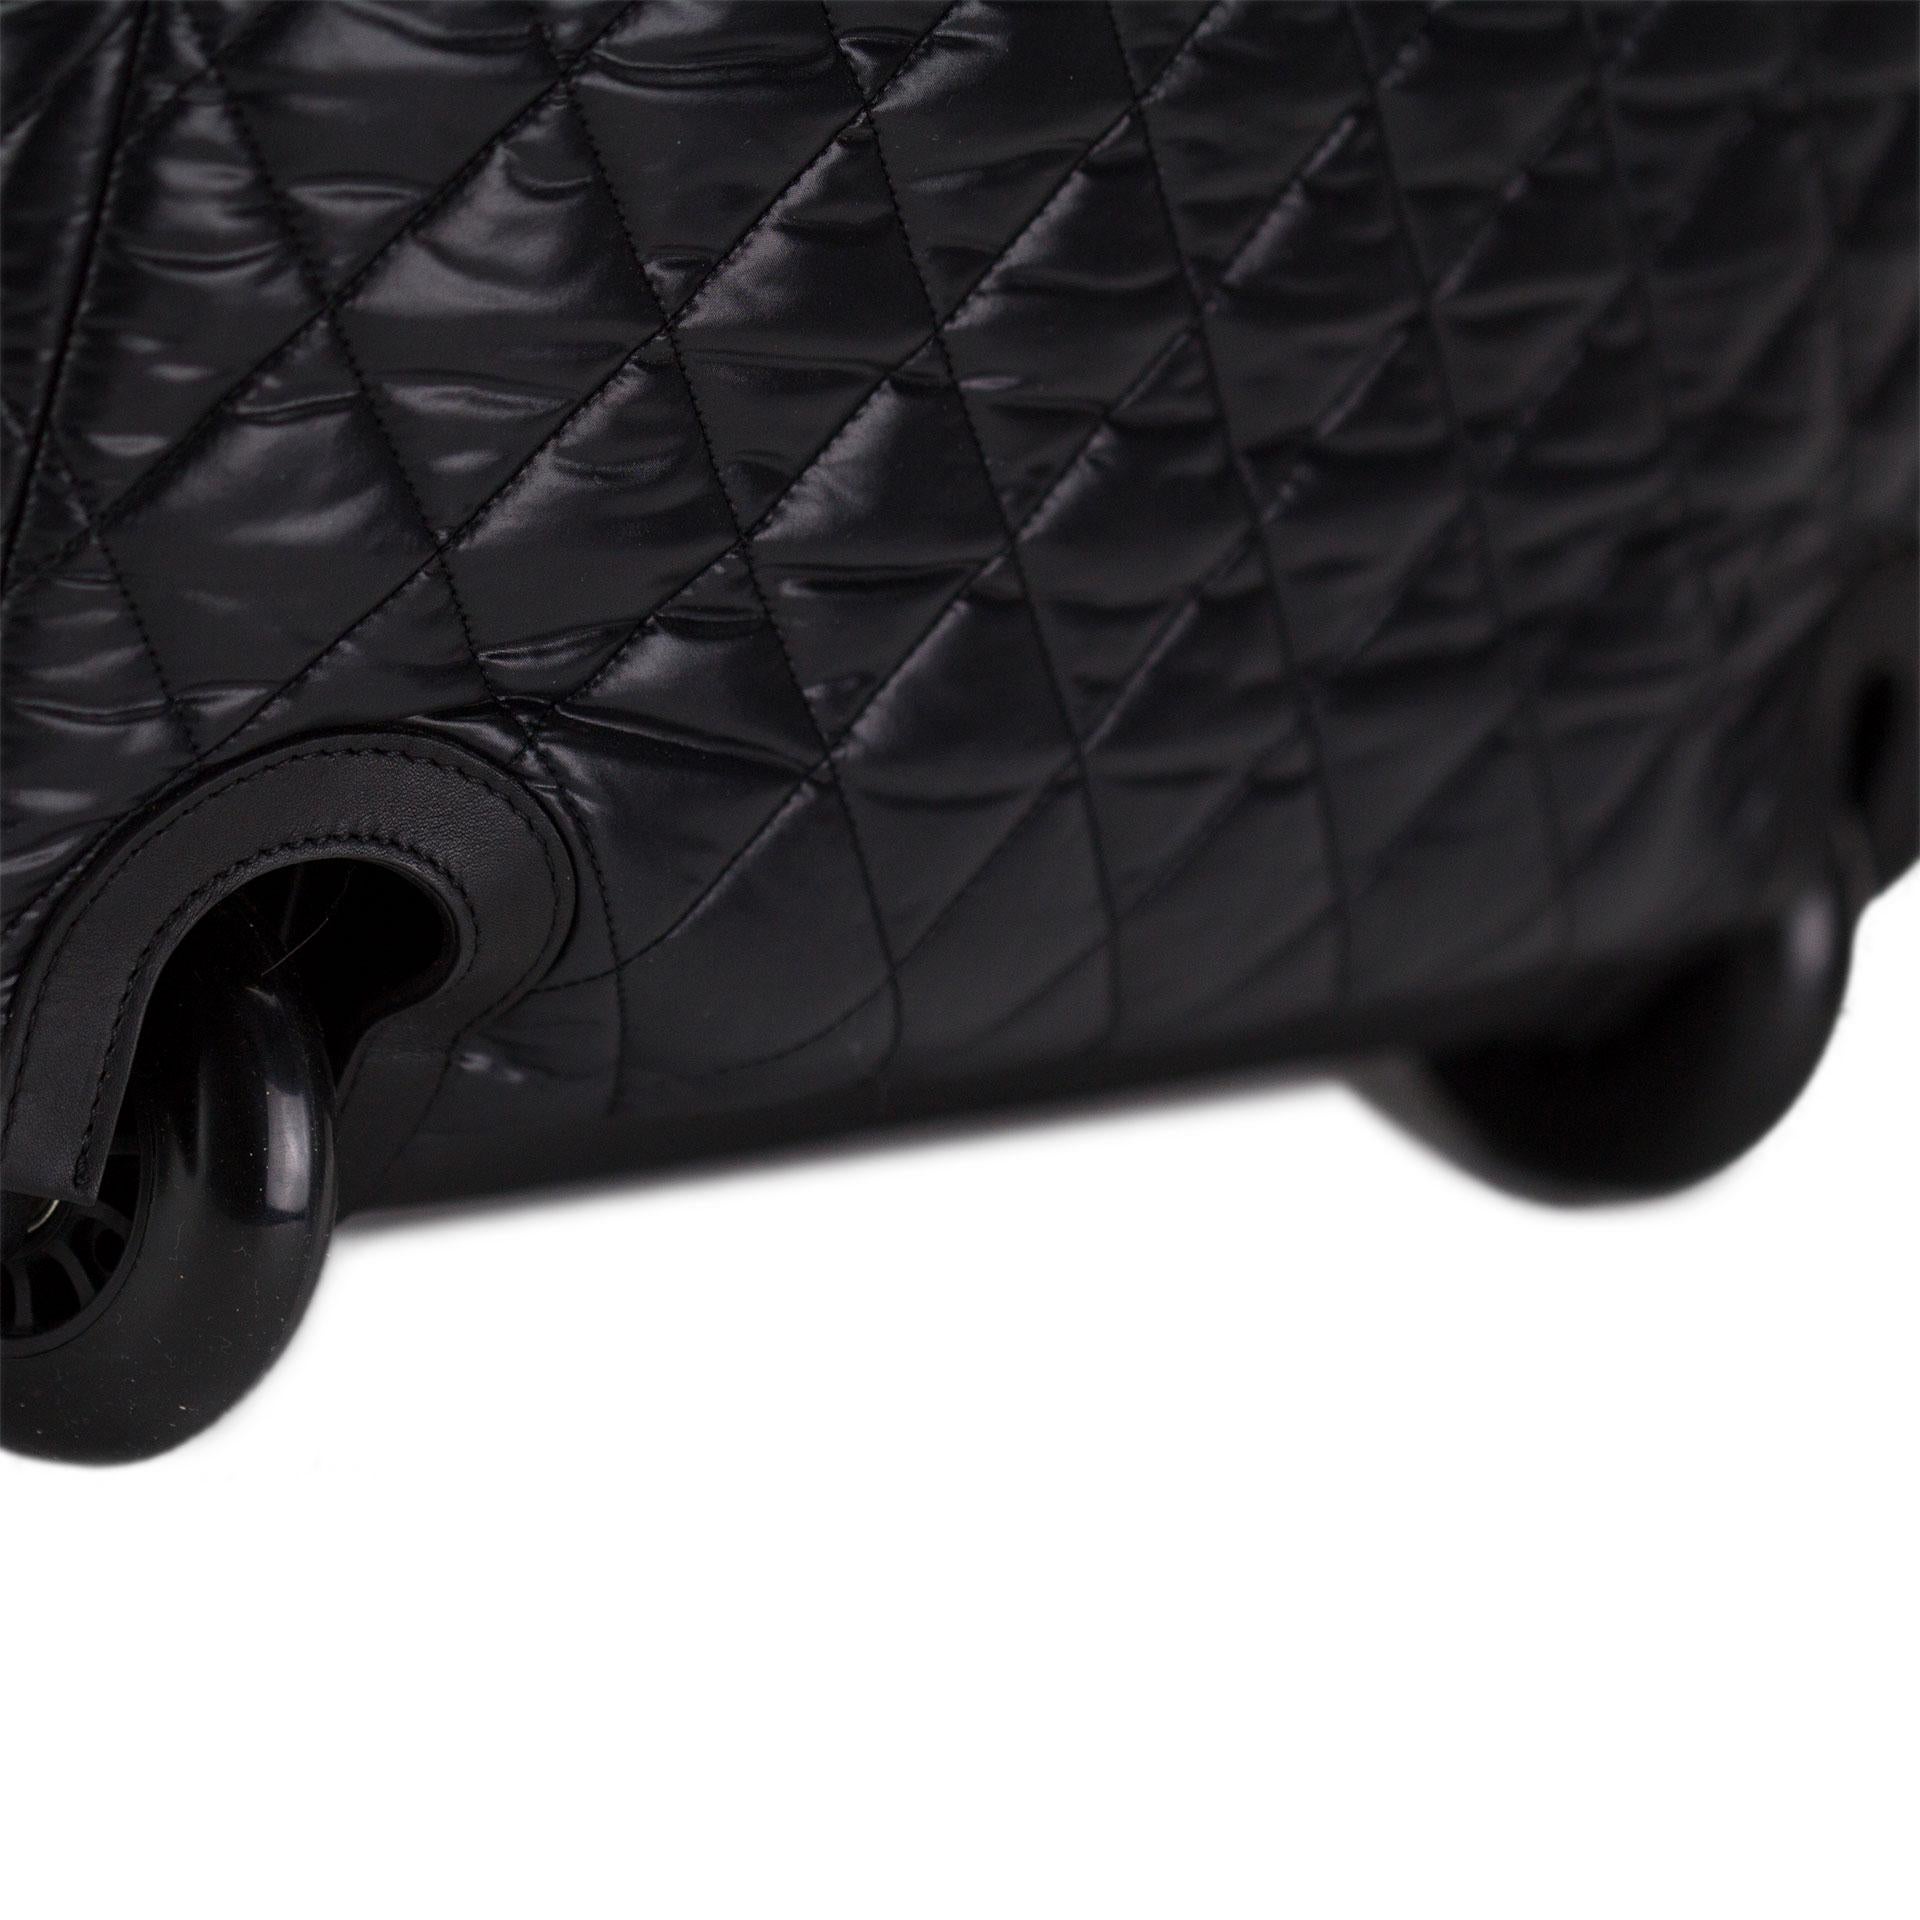 Chanel 2012 Coco Cocoon Quilted Case Carry On Trolley Travel Black Luggage Bag For Sale 5